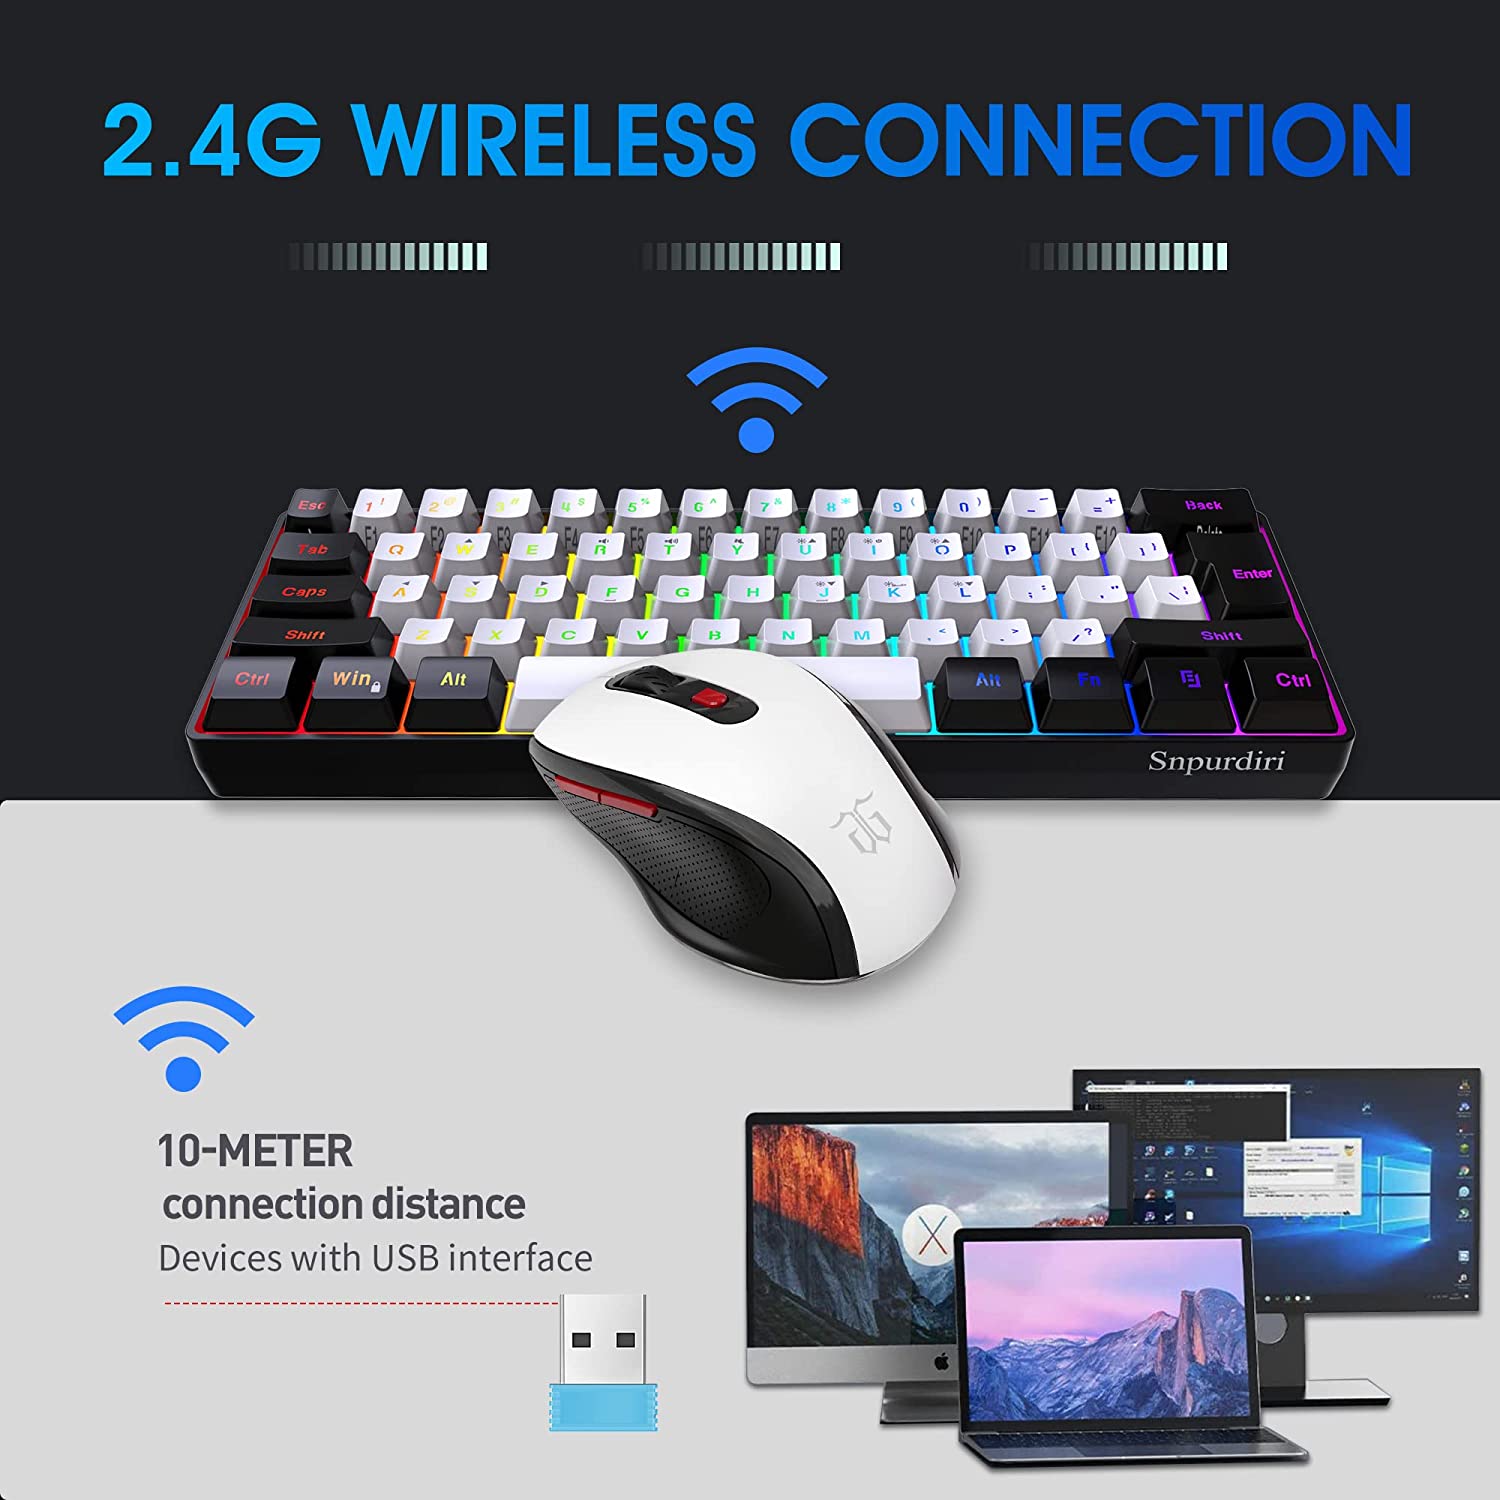 Snpurdiri 2.4G Wireless Gaming Keyboard and Mouse Combo, Black-White